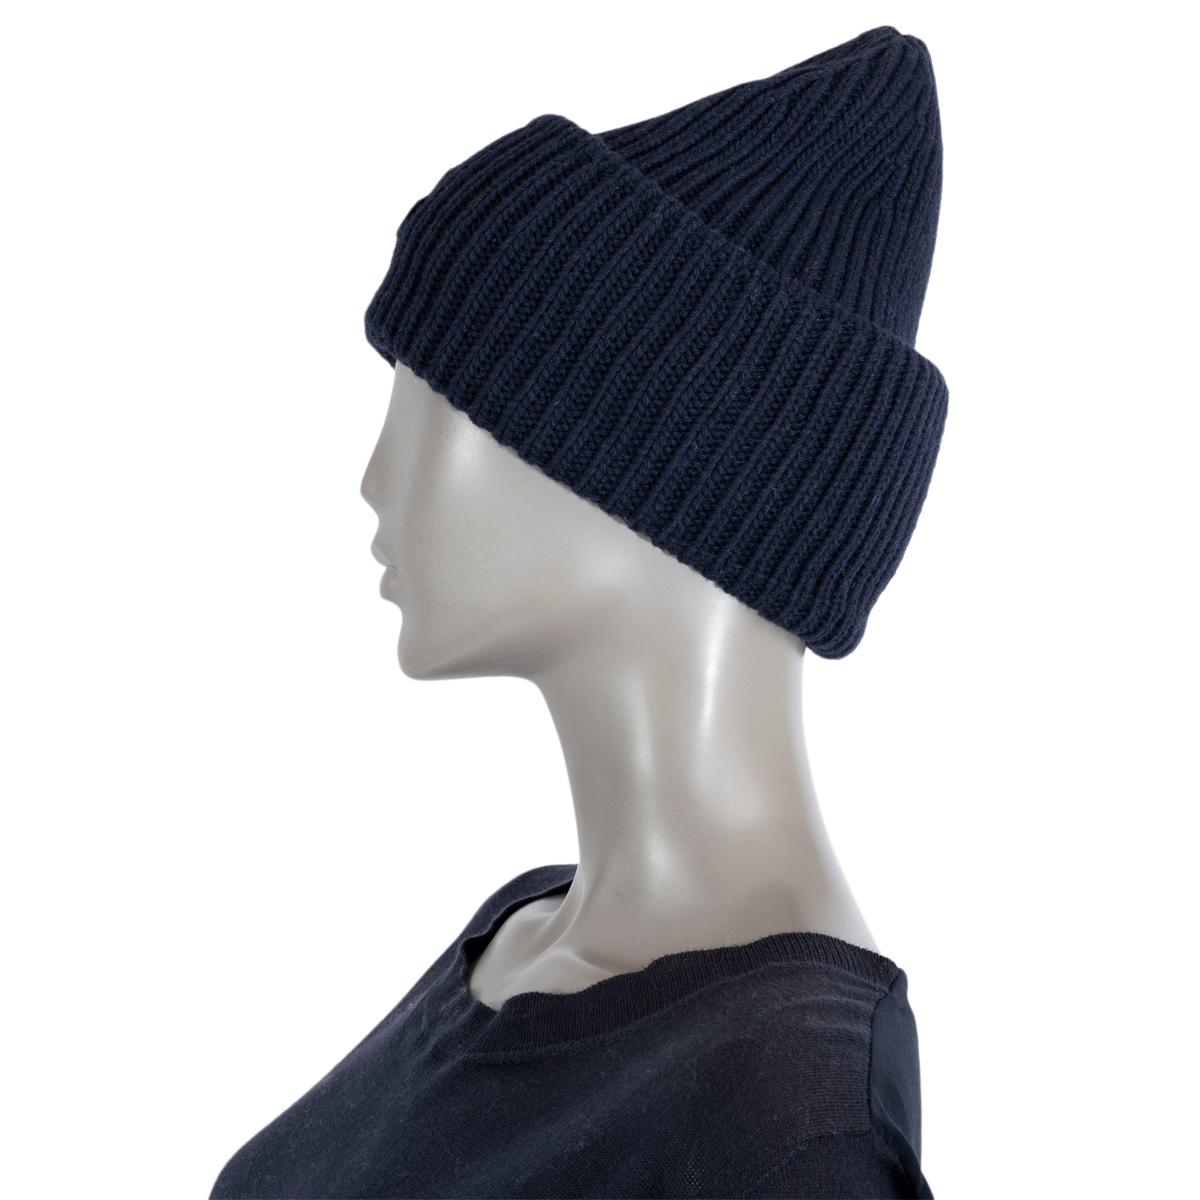 Women's MONCLER x PALM ANGELS navy blue wool KNIT Beanie Knit Hat One Size